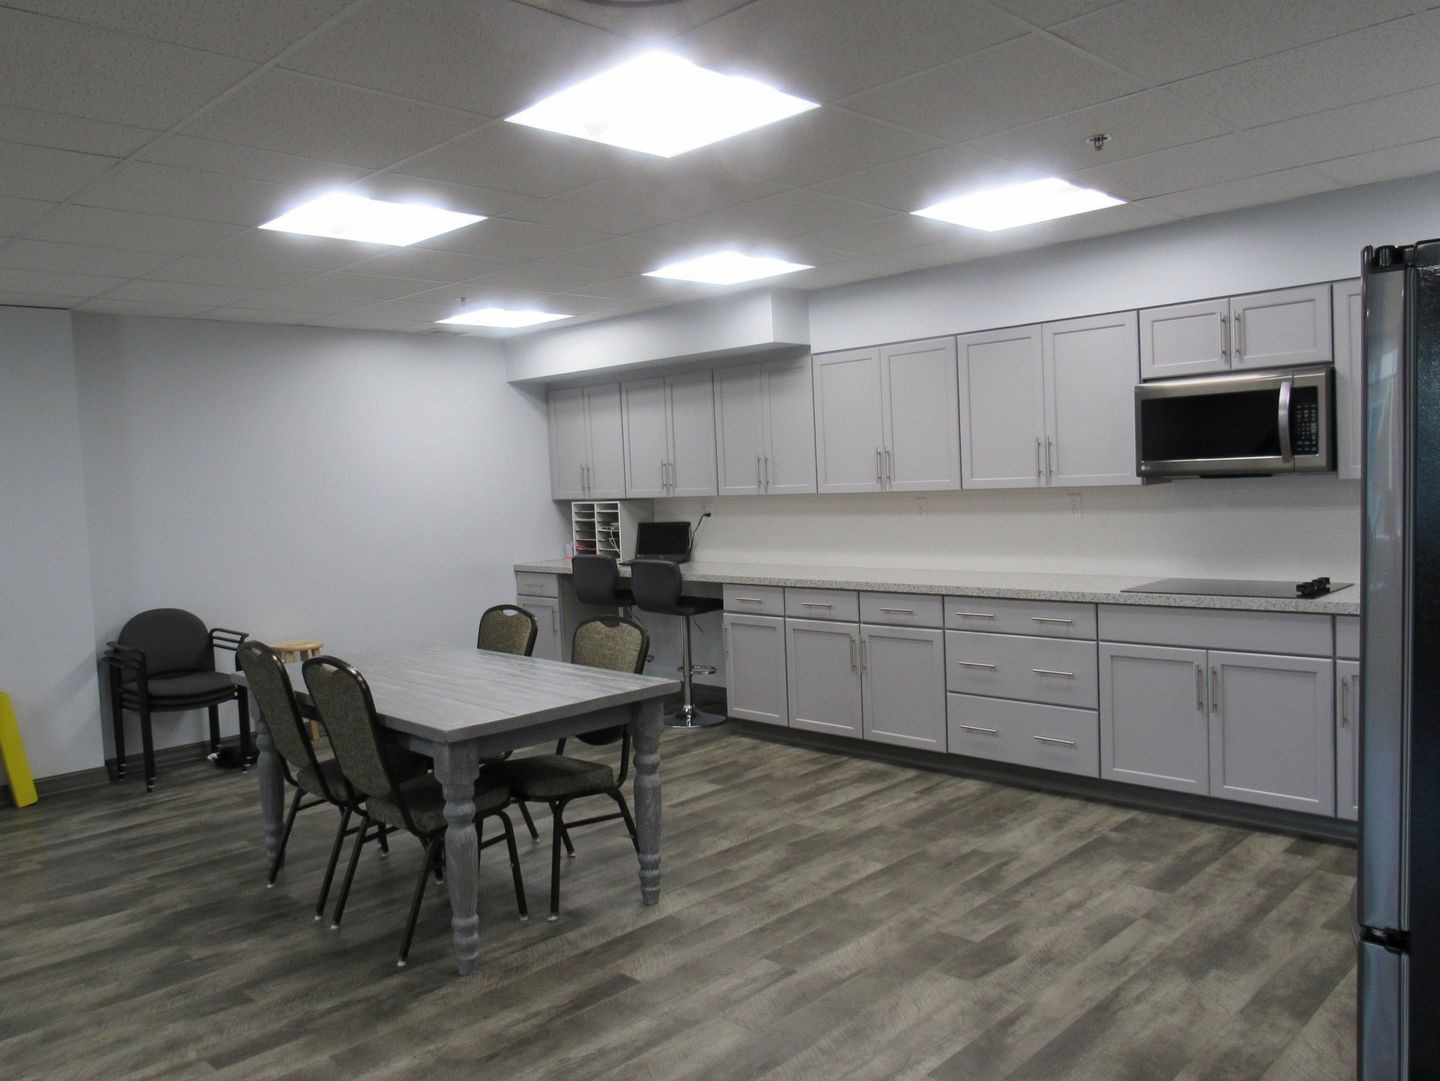 Therapy Kitchen at Lenawee Medical Care Facility in Adrian, MI